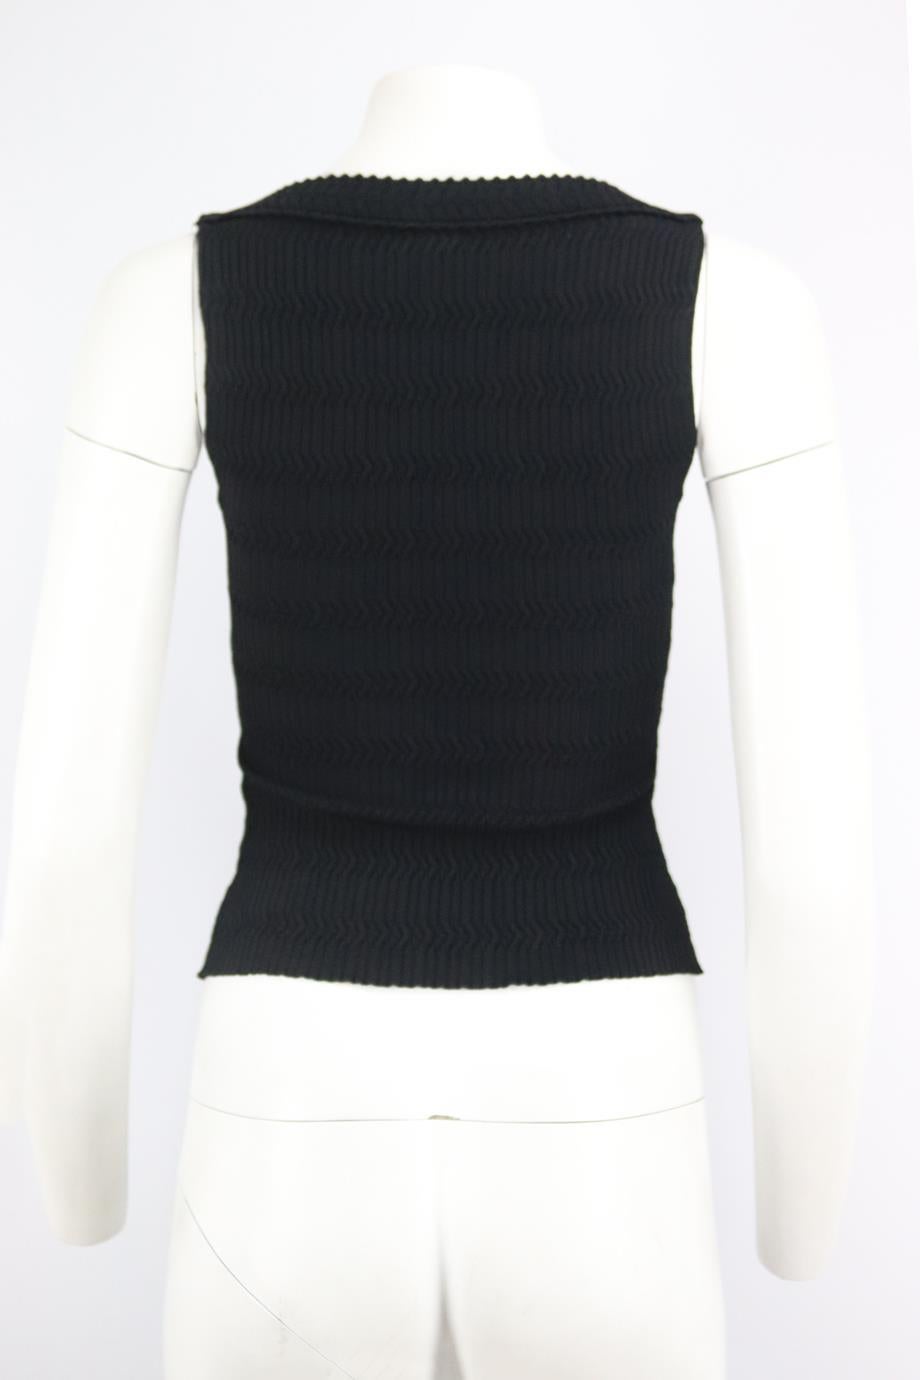 Azzedine Alaïa Stretch Knit Top Fr 36 Uk 8 In Excellent Condition In London, GB